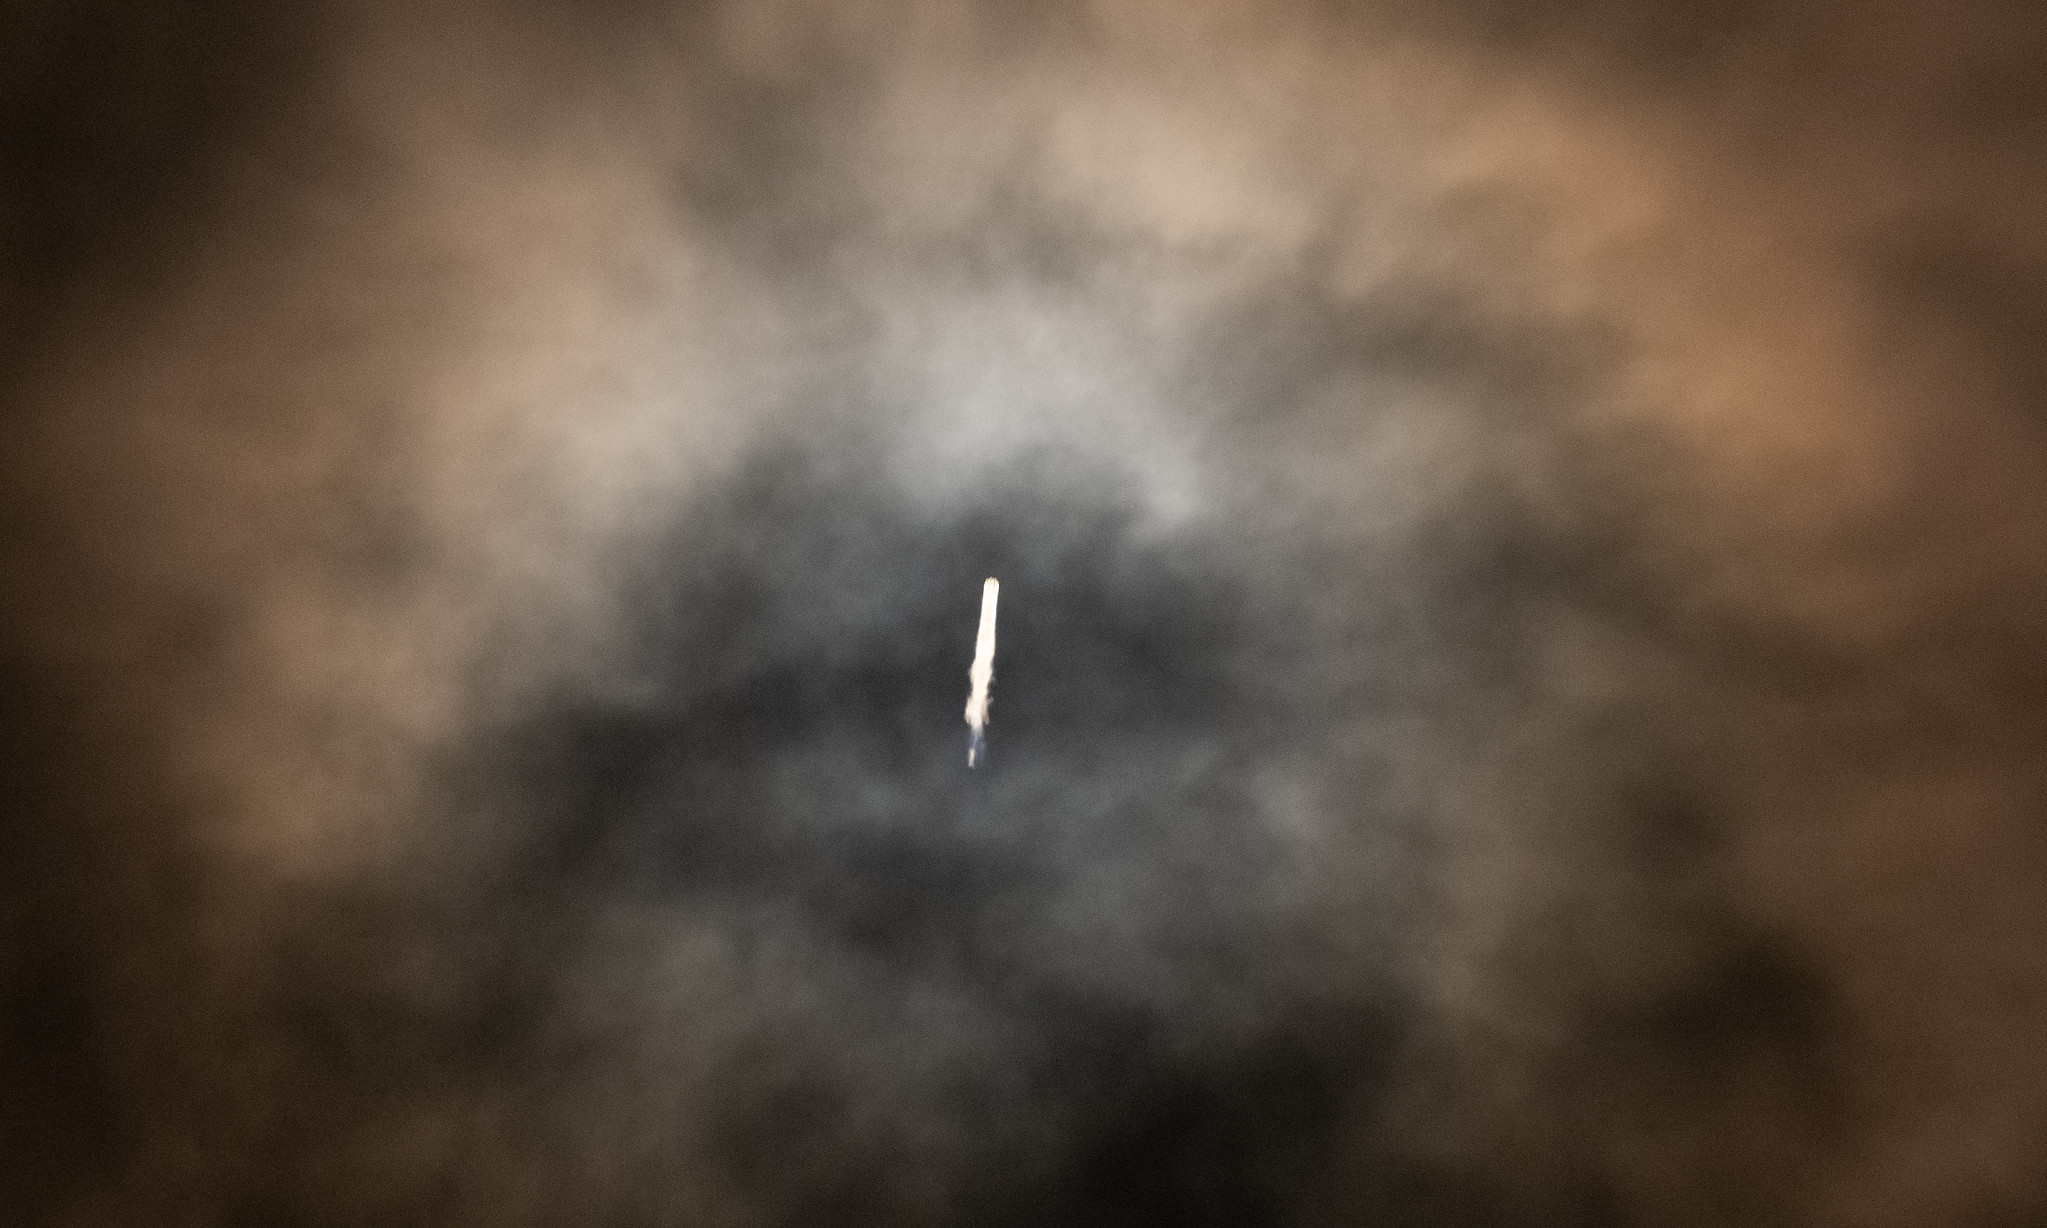 A SpaceX Falcon 9 rocket carrying the company's Crew Dragon spacecraft is launched on NASA’s SpaceX Crew-3 mission to the International Space Station with NASA astronauts Raja Chari, Tom Marshburn, Kayla Barron, and ESA (European Space Agency) astronaut Matthias Maurer onboard, Wednesday, Nov. 10, 2021, at NASA’s Kennedy Space Center in Florida.